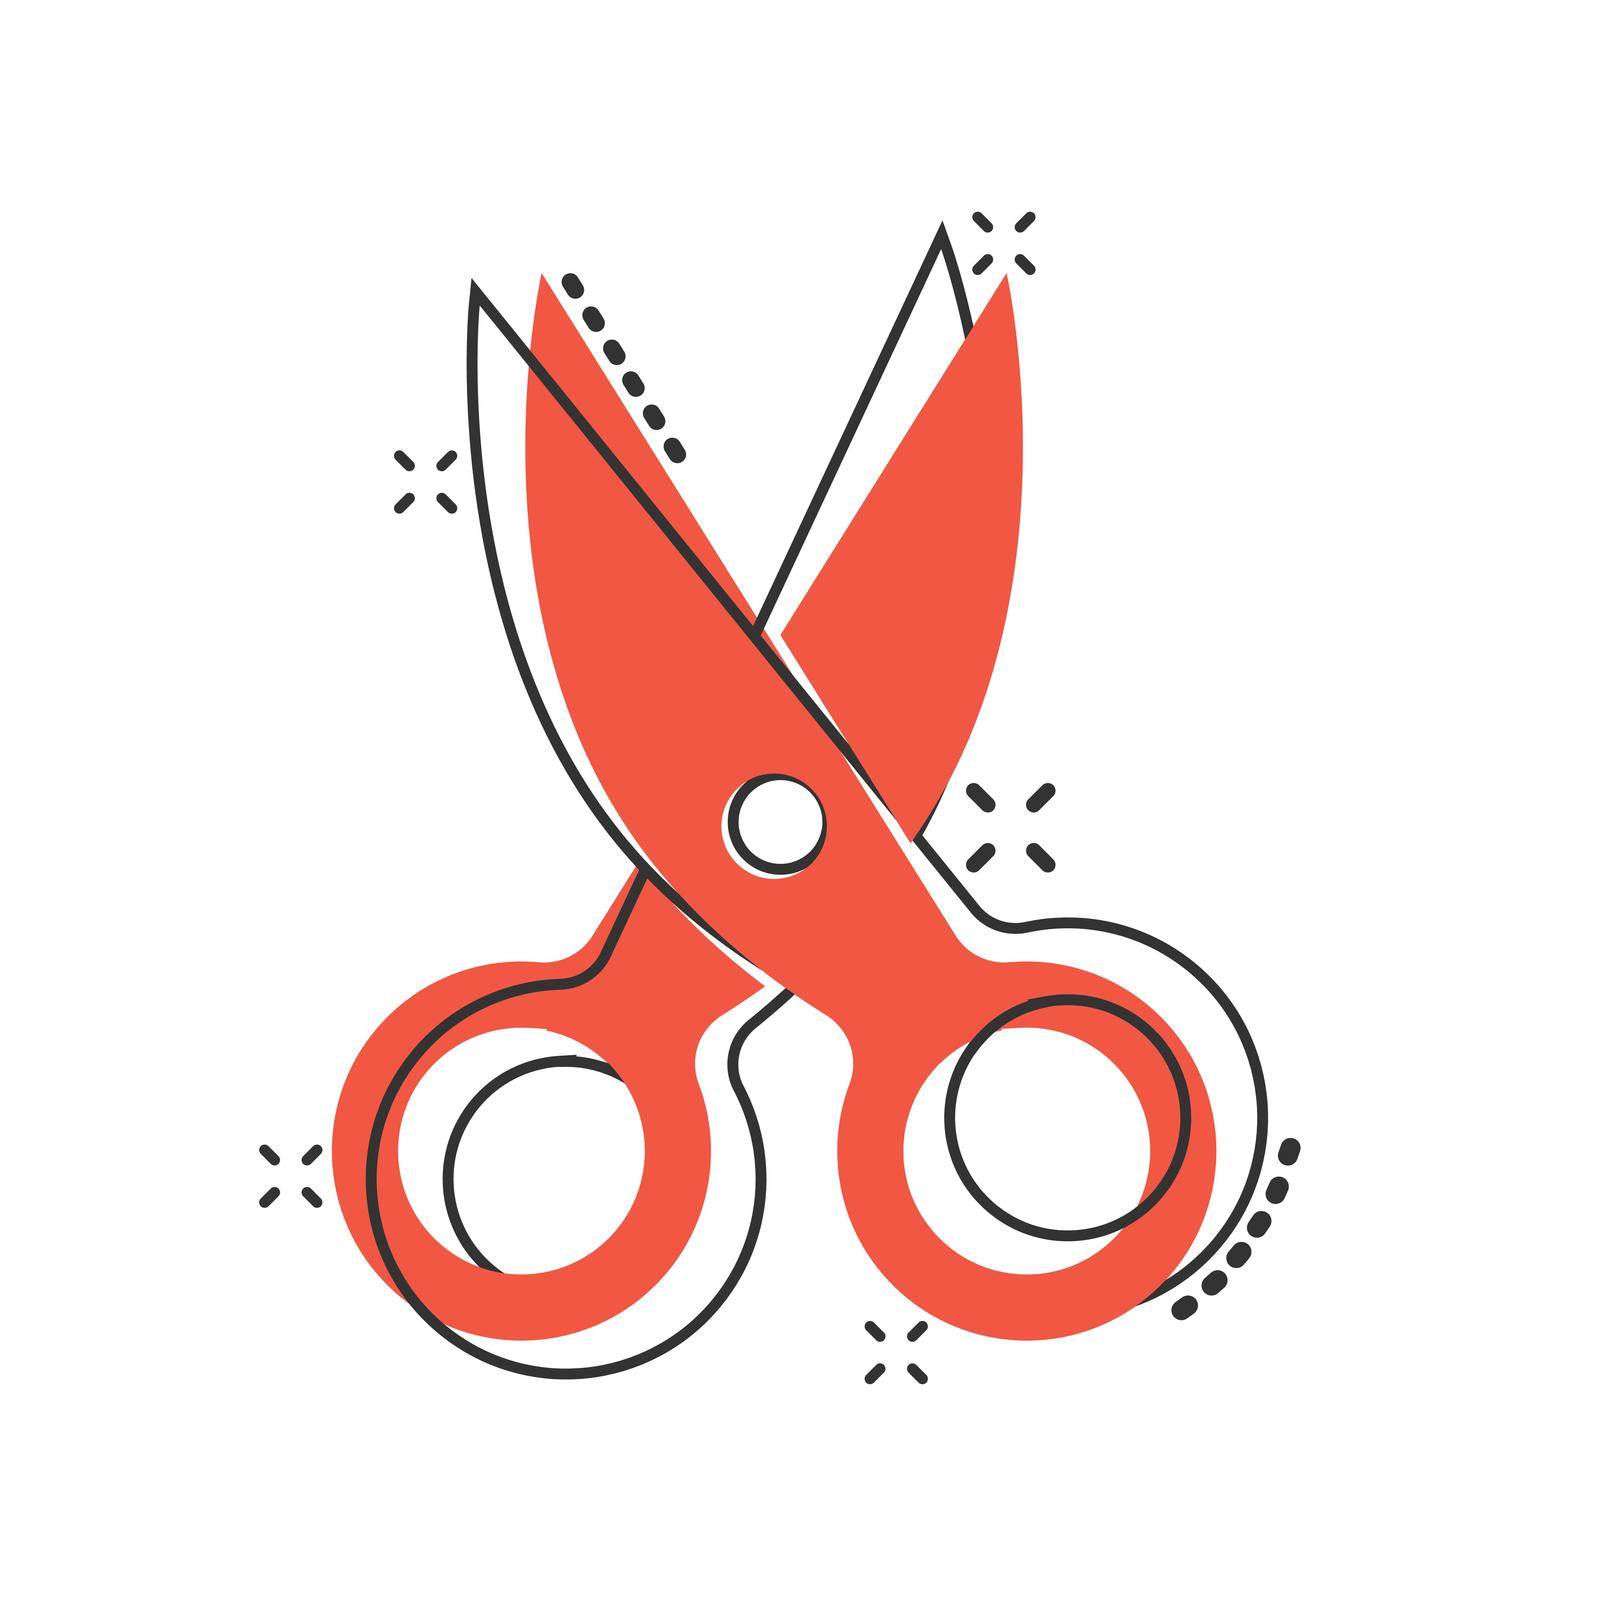 Scissor icon in comic style. Cut equipment cartoon vector illustration on white isolated background. Cutter splash effect business concept.